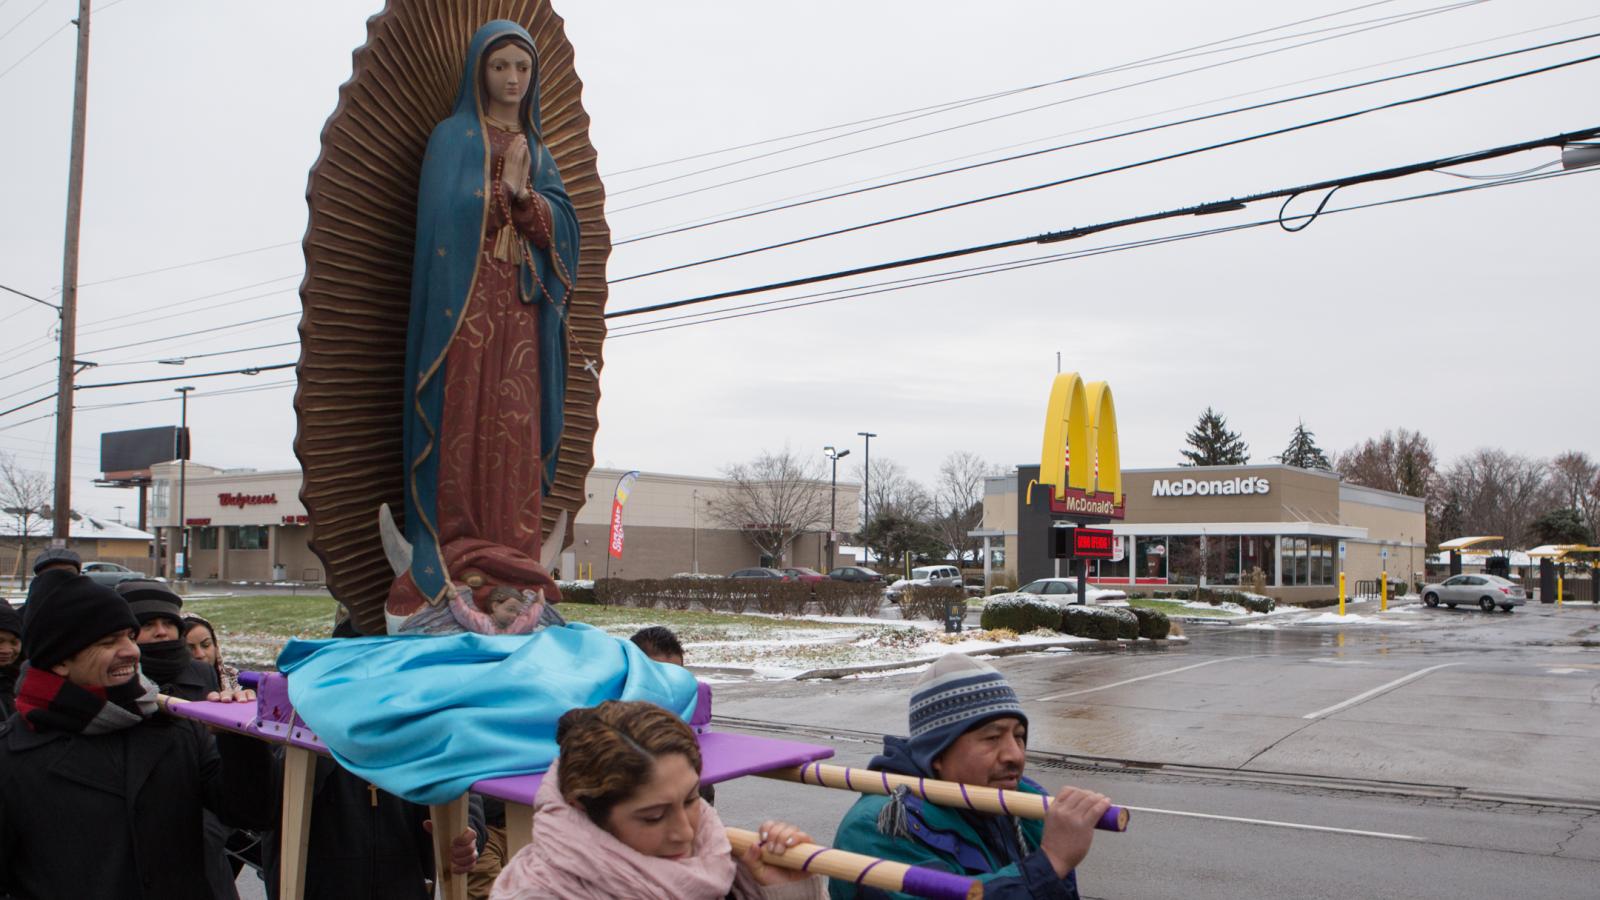 Four people hold poles that are attached to a platform. A large sculpture of Our Lady of Guadaloupe is on the platform. They are in a parking lot. 